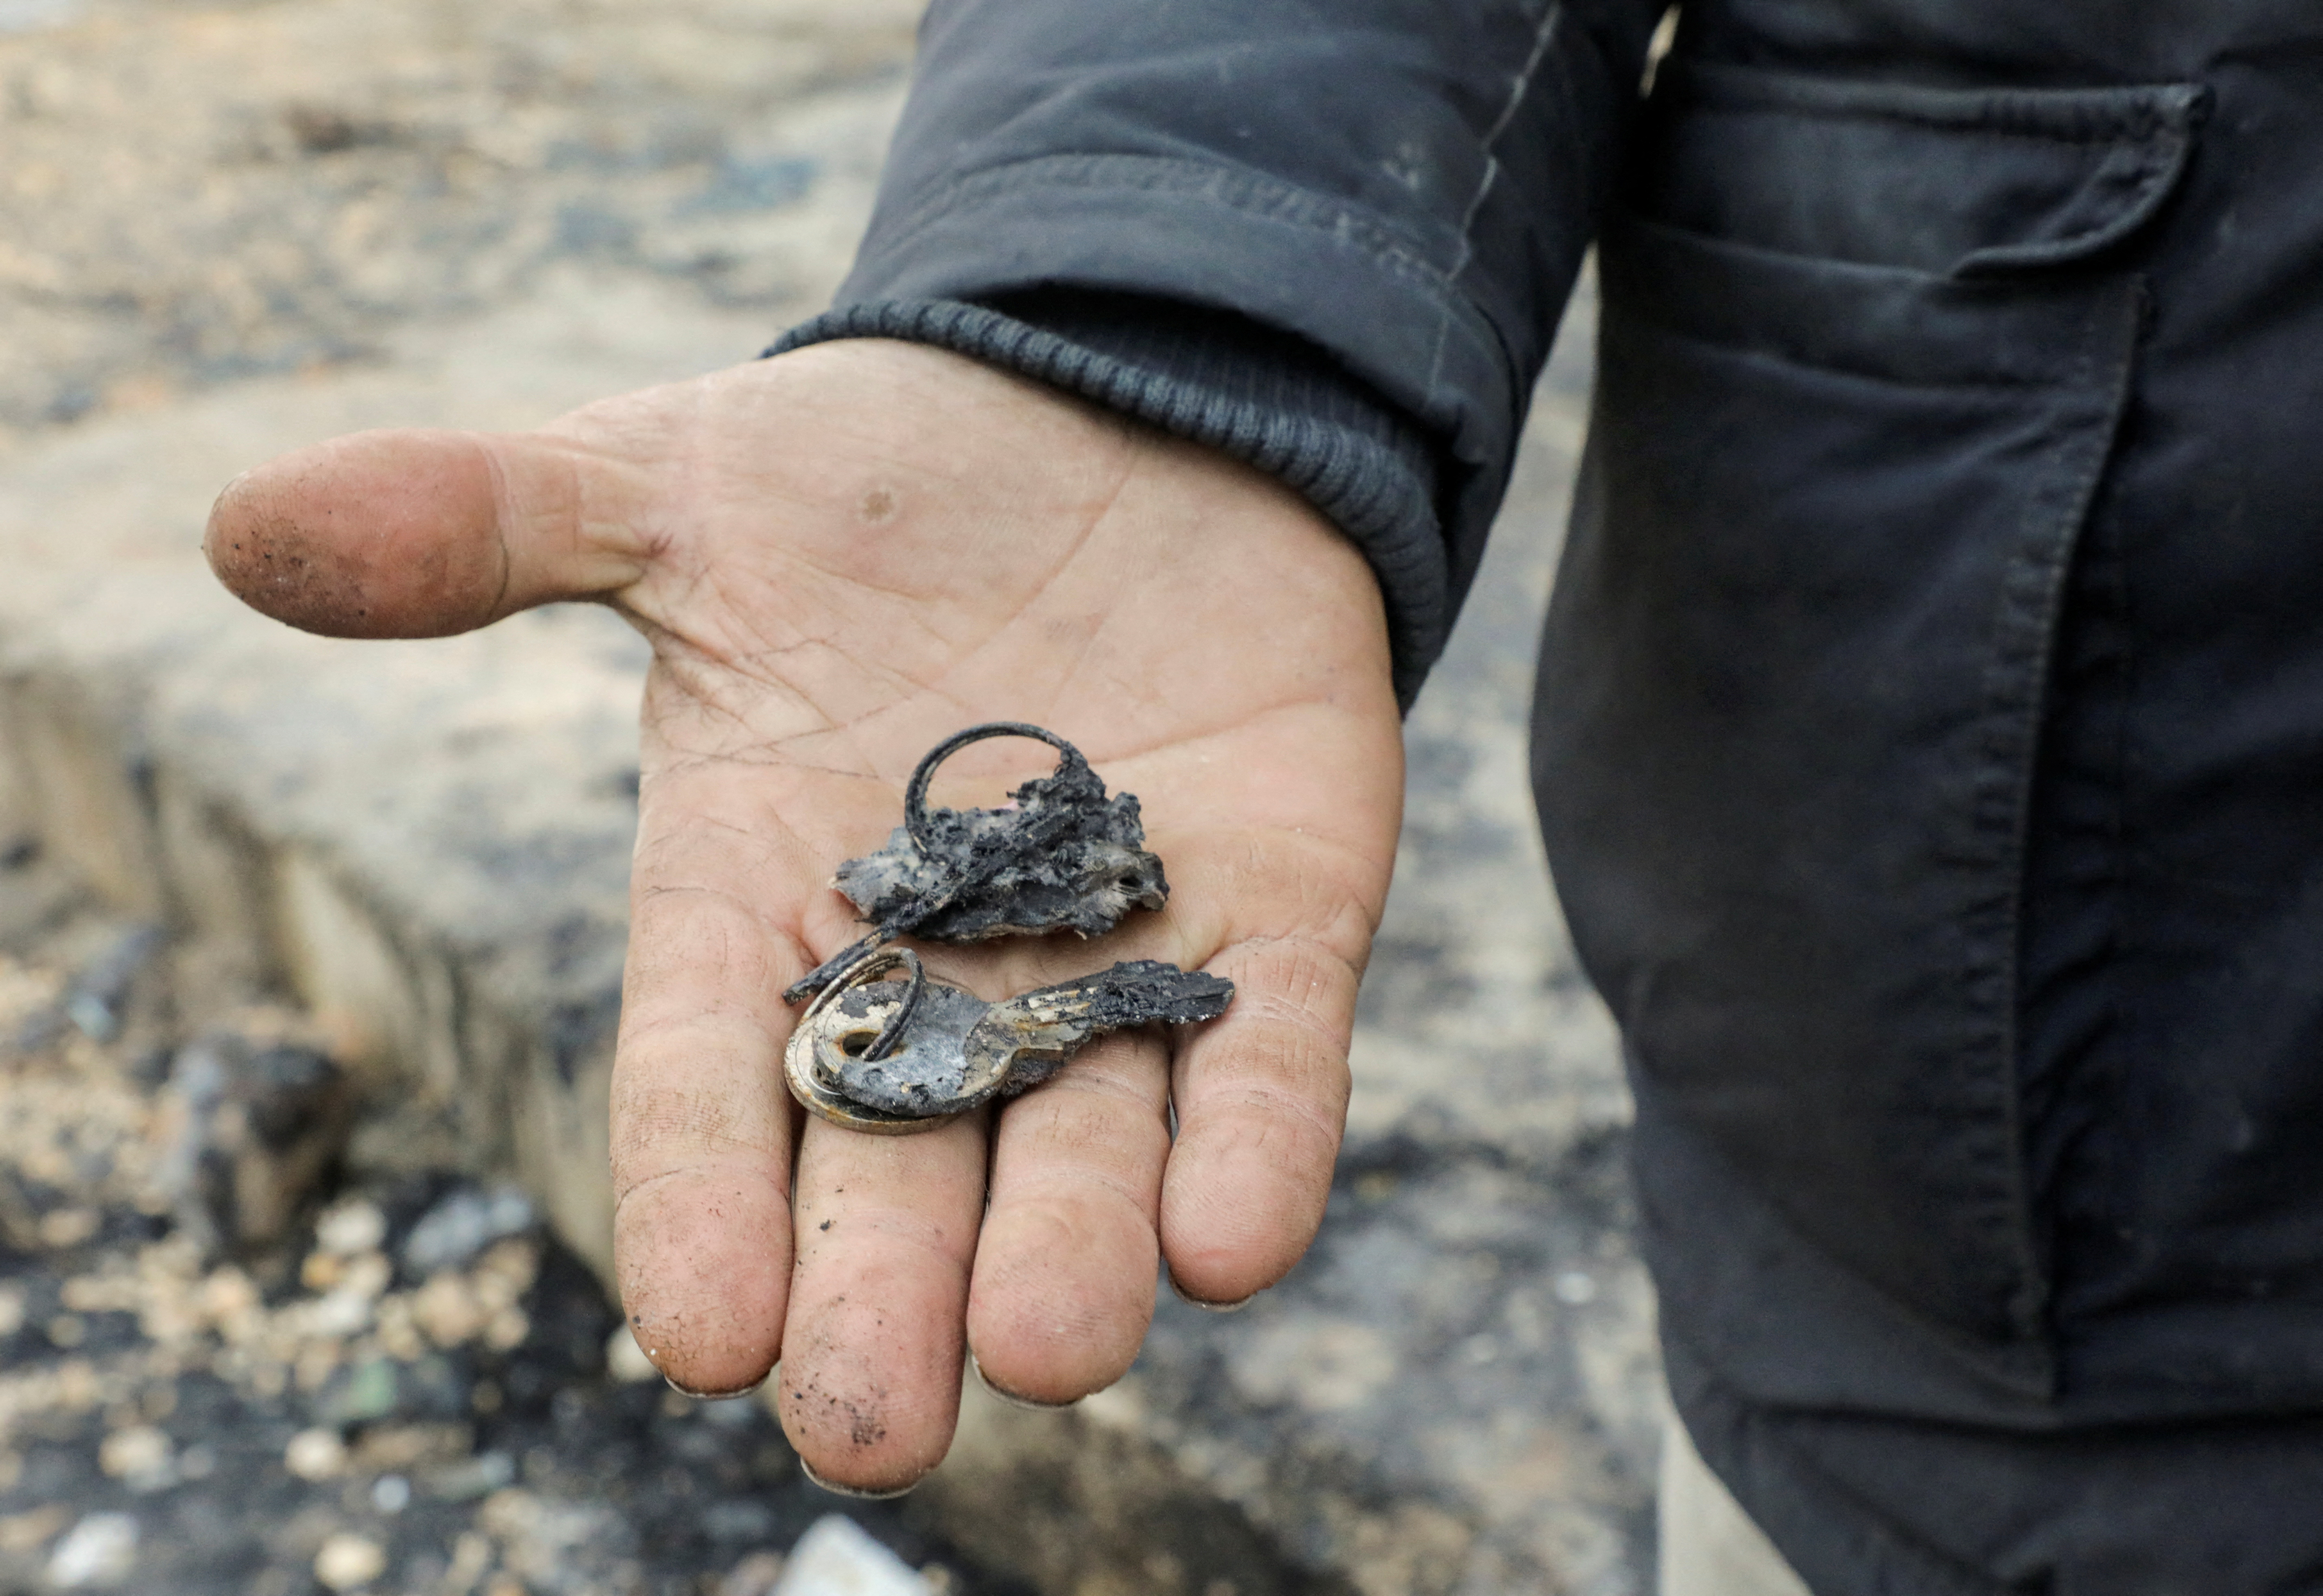 Nouredin al-Abdullah, a cousin of Ahmed al-Abdullah, who is the father of the girls Lin and Intissar and died as a heater ignited their tent, holds burnt keys of the destroyed tent at a camp for the internally displaced in Aleppo countryside